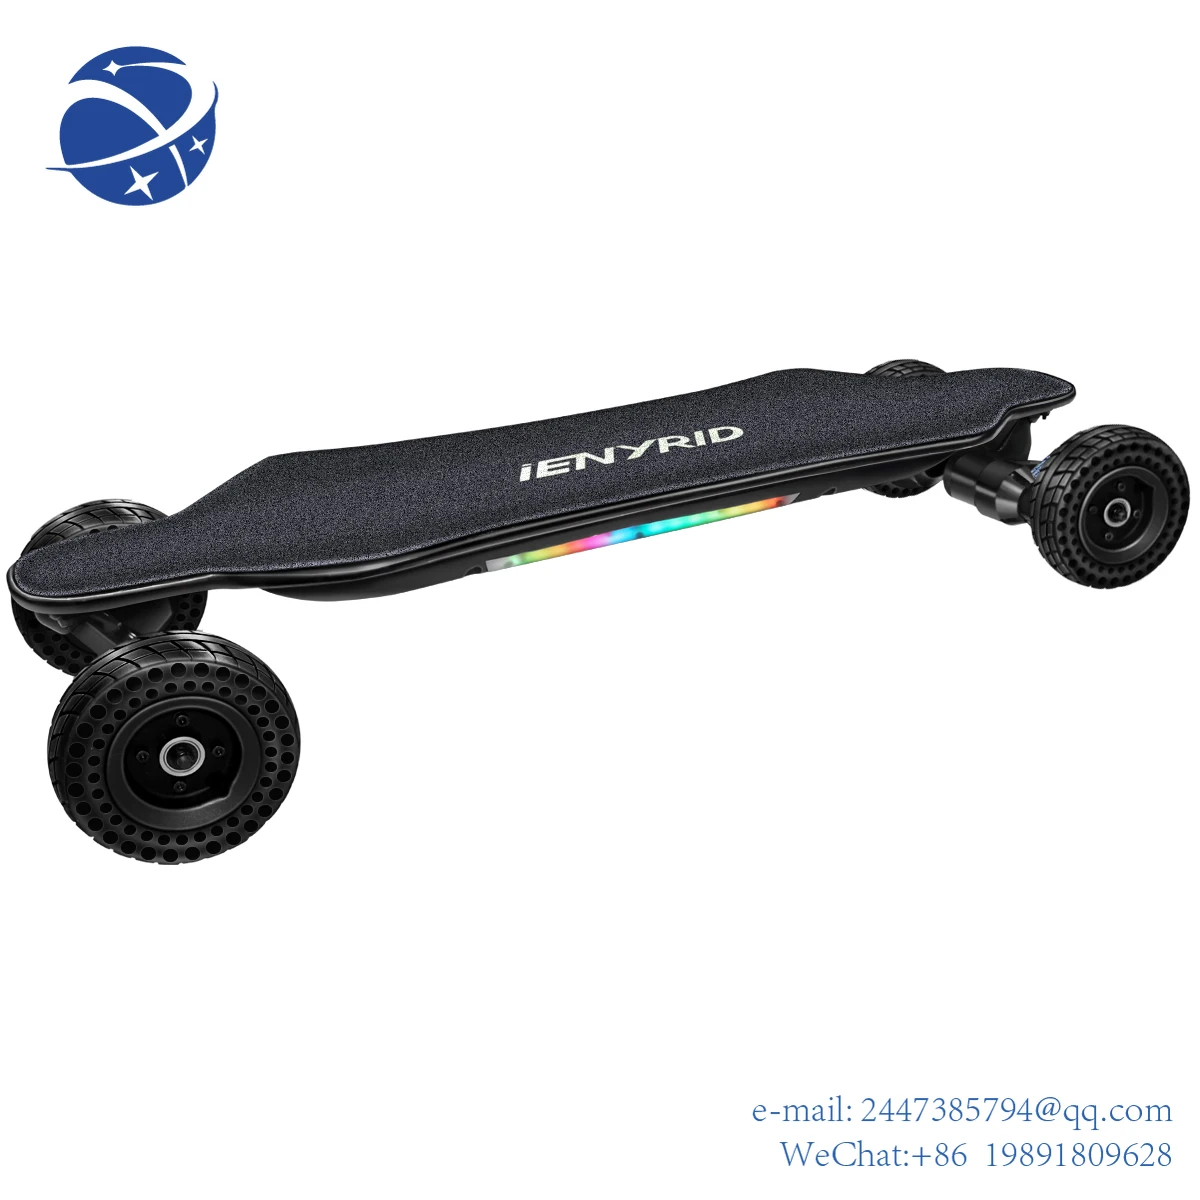 Yun YiUSA warehouse 4 wheel Electric SUV-skateboard Fast delivery time FCC ROHS CE electric skateboard is best warehouse supplies plastic time cards holder attendance rack goods organizer brackets